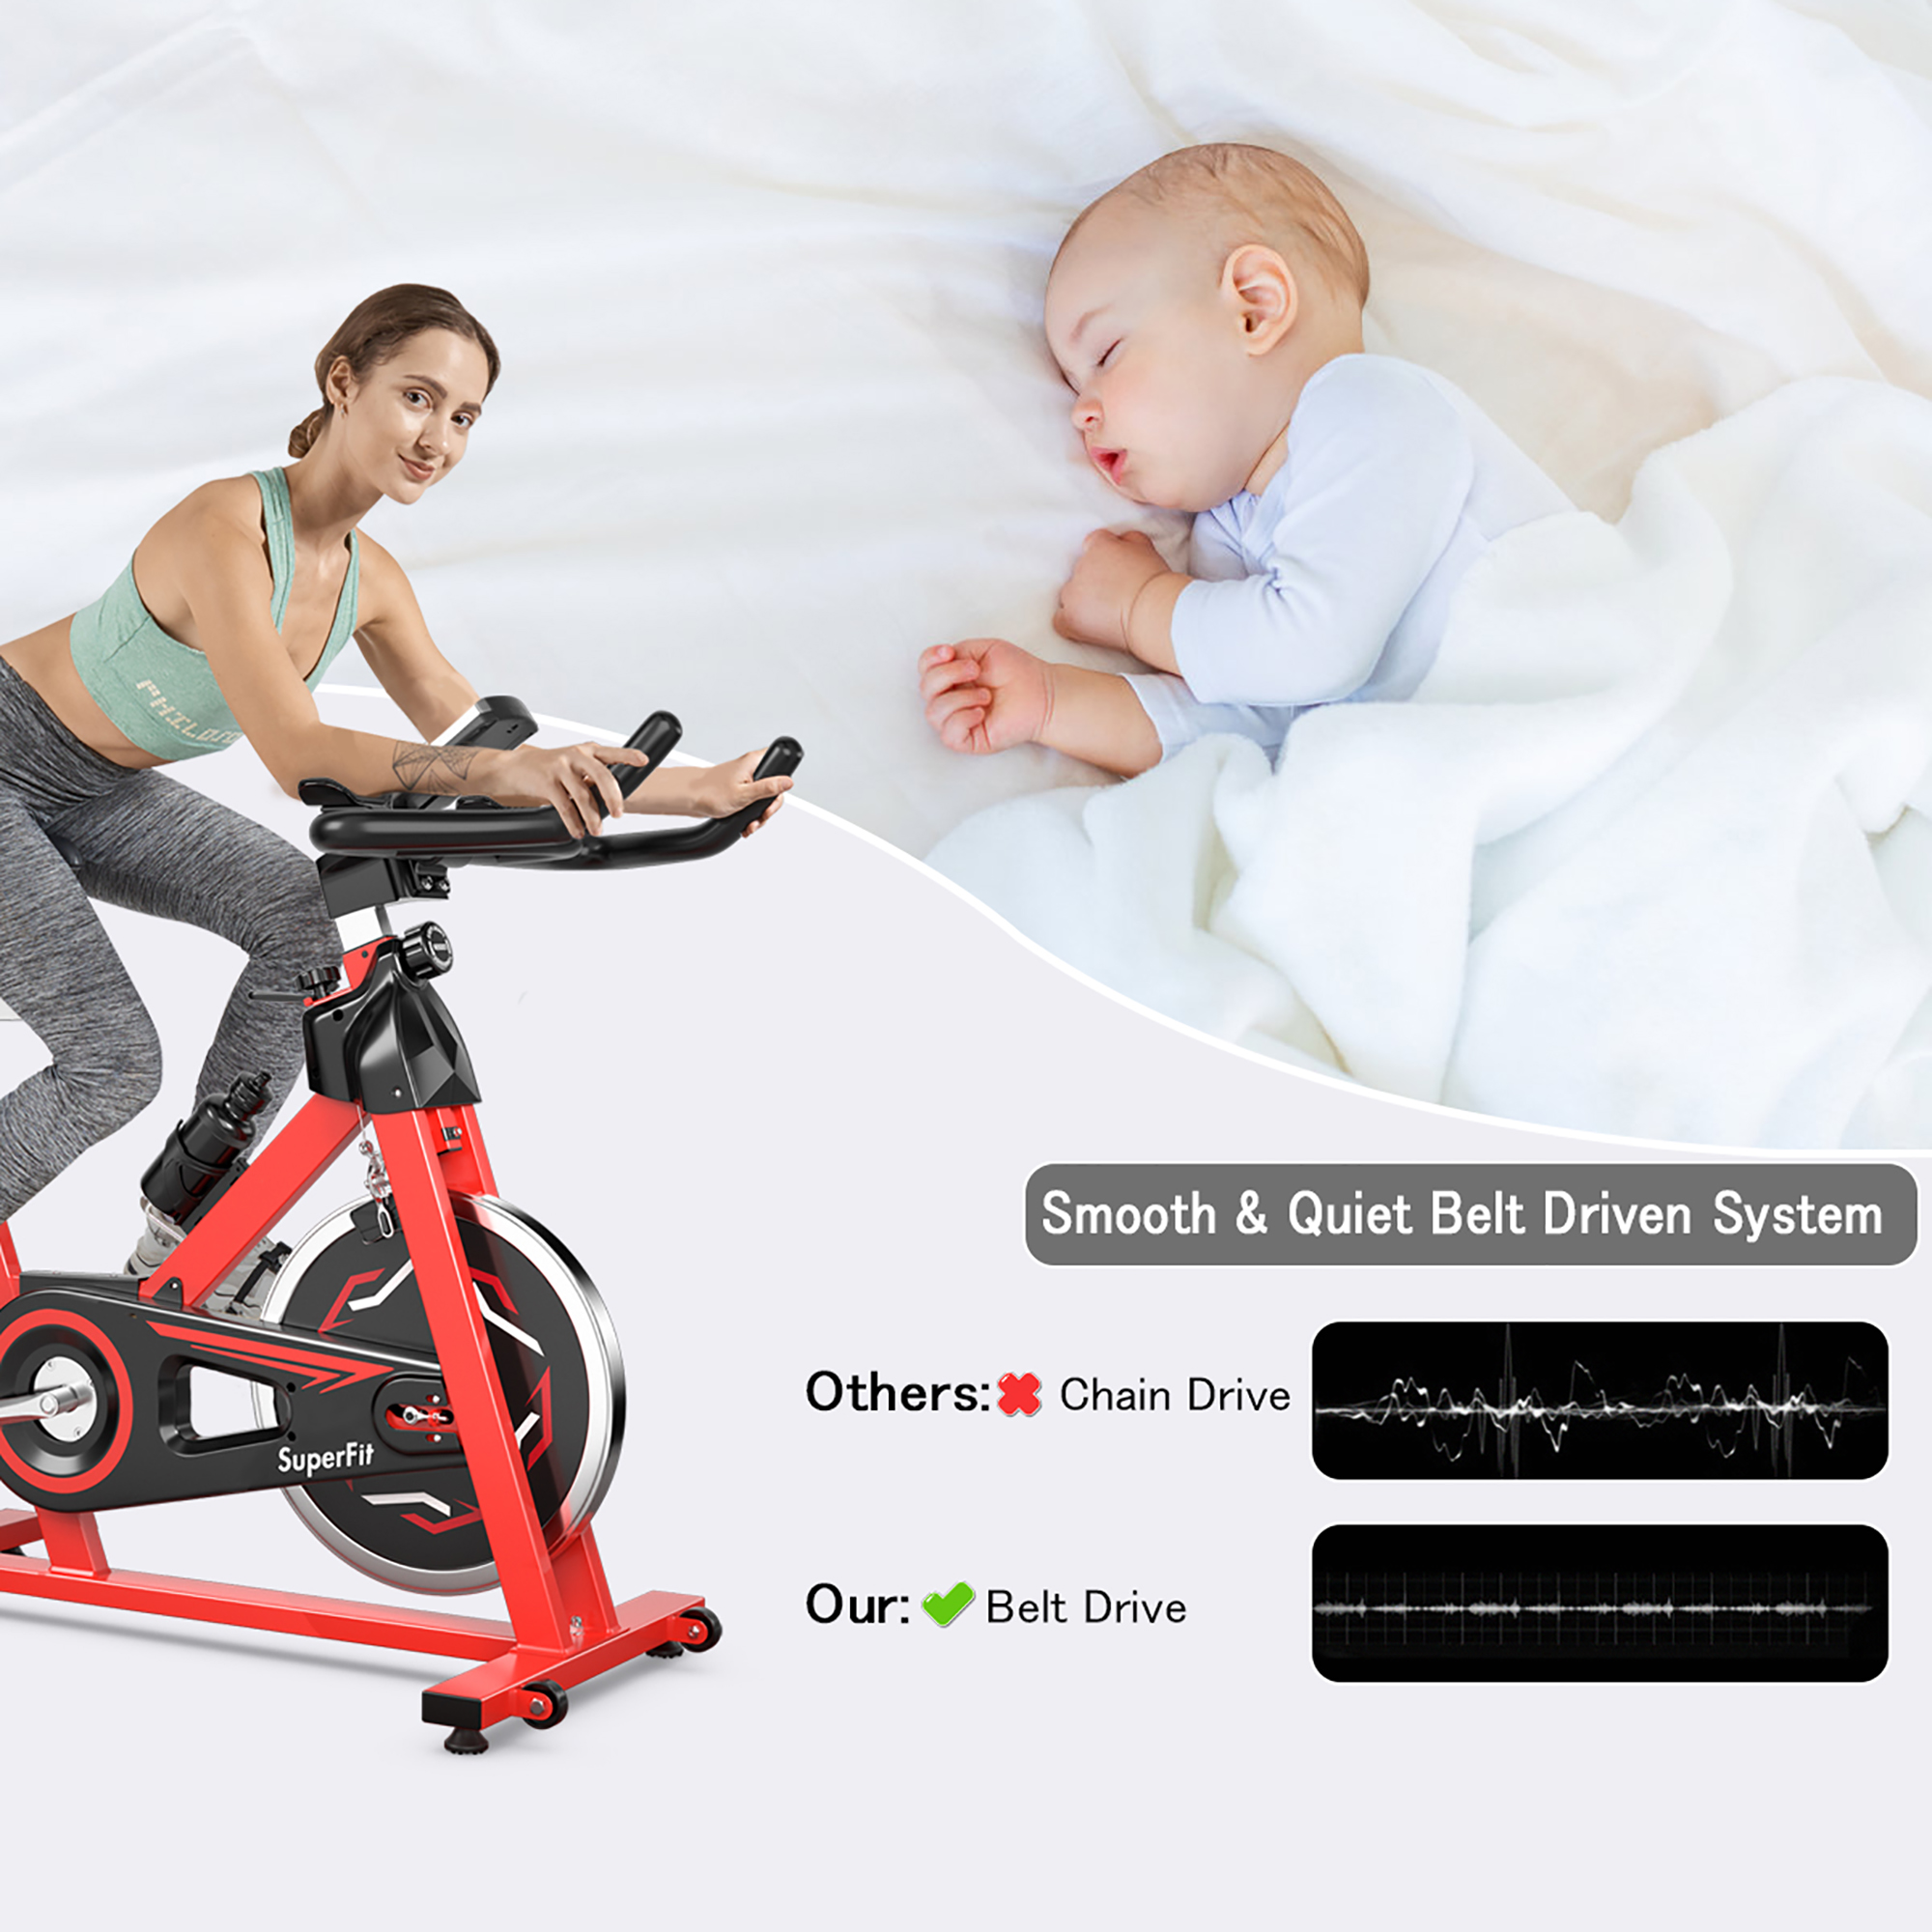 Costway Goplus Stationary Indoor Fitness Cycling Bik w/ LCD Monitor Red